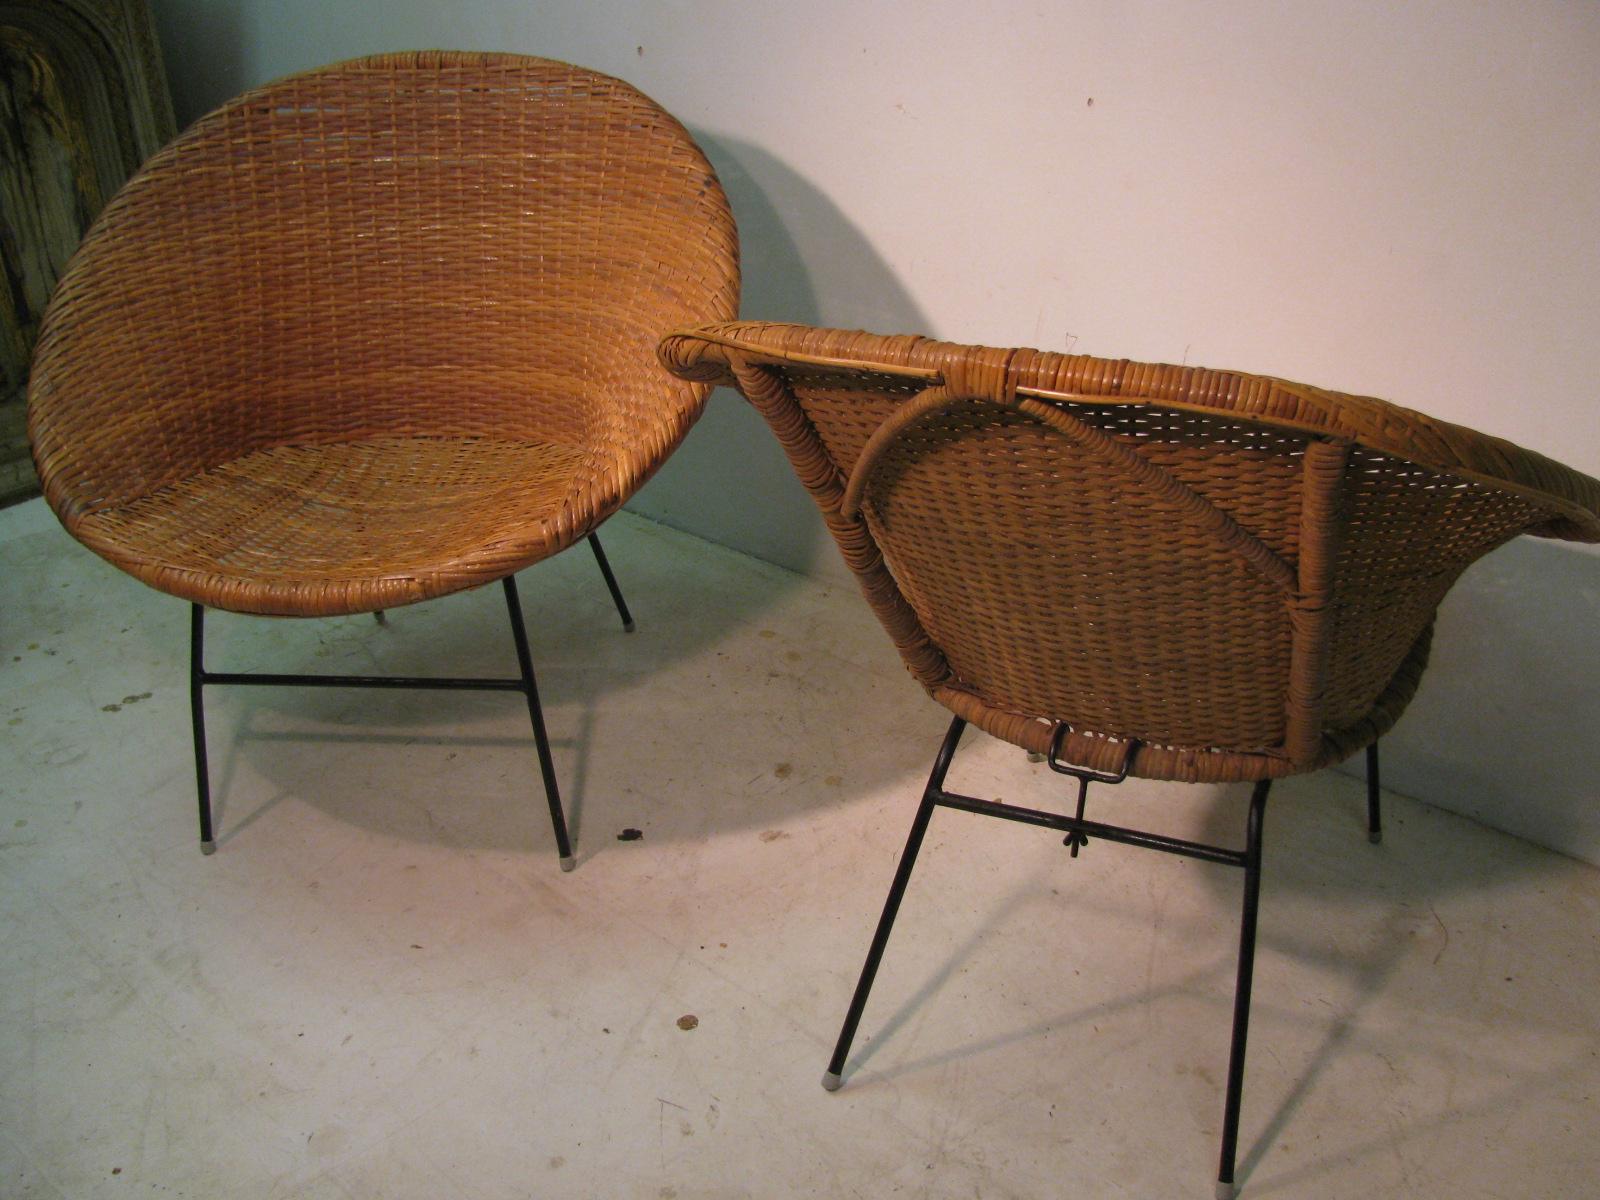 Fabulous pair of midcentury rattan hoop chairs. Iron base with woven rattan seat and sides. Condition is great with no breaks and are very sturdy. Slight bend in one front leg, #3 and #4 chairs.